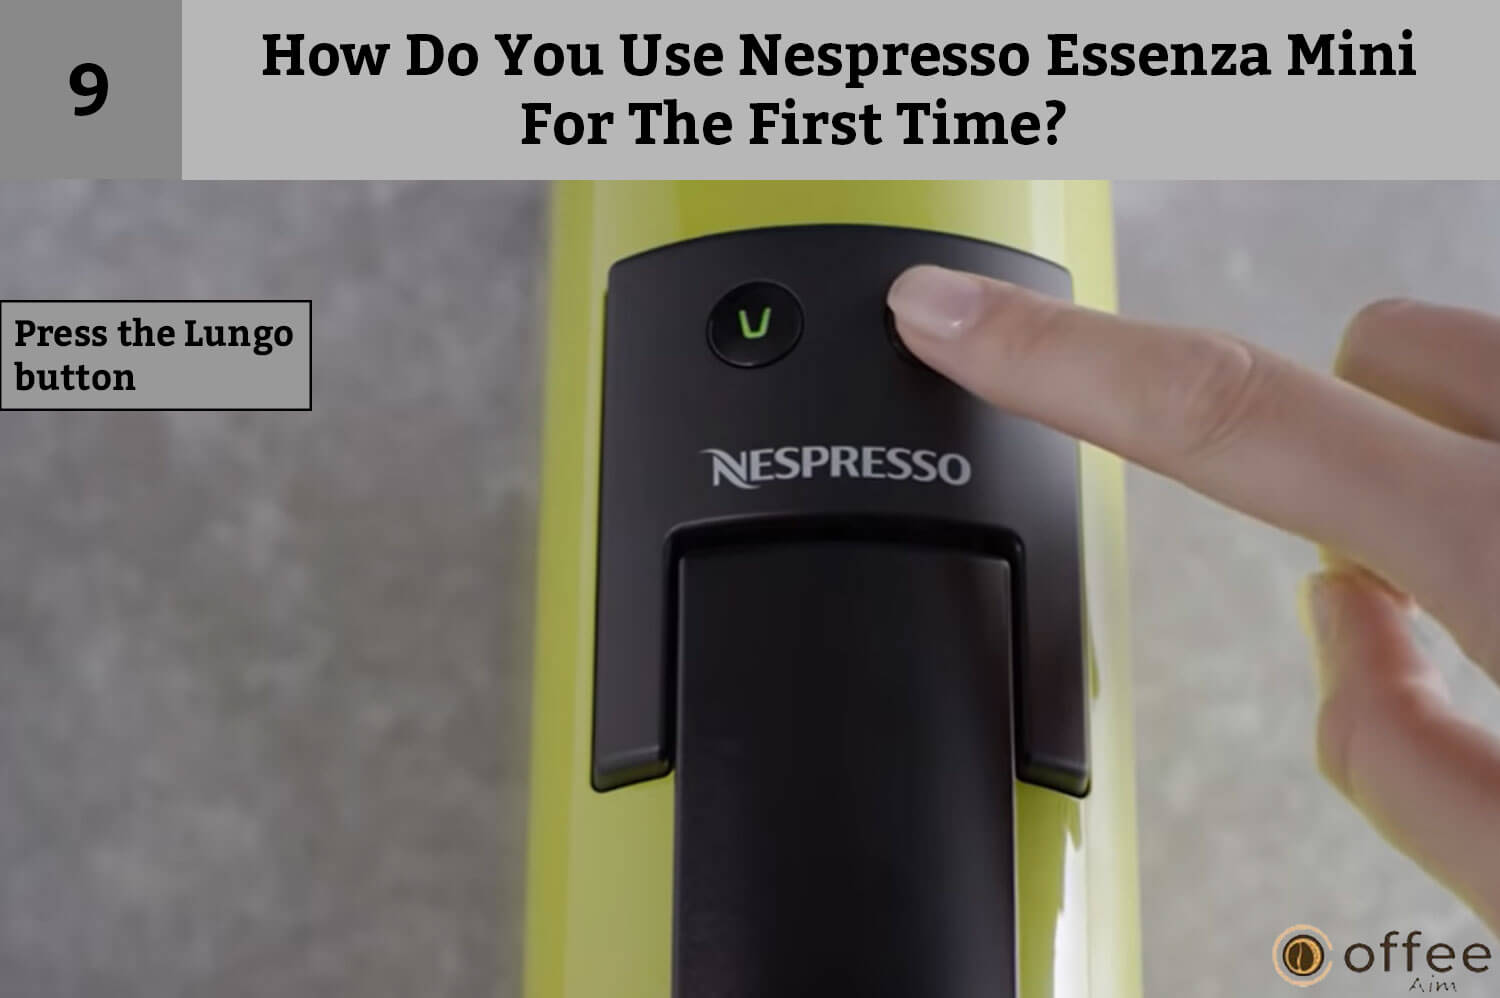 Ninth instruction of How Do You Use Nespresso Essenza Mini For The First Time? is Press the lungo button.